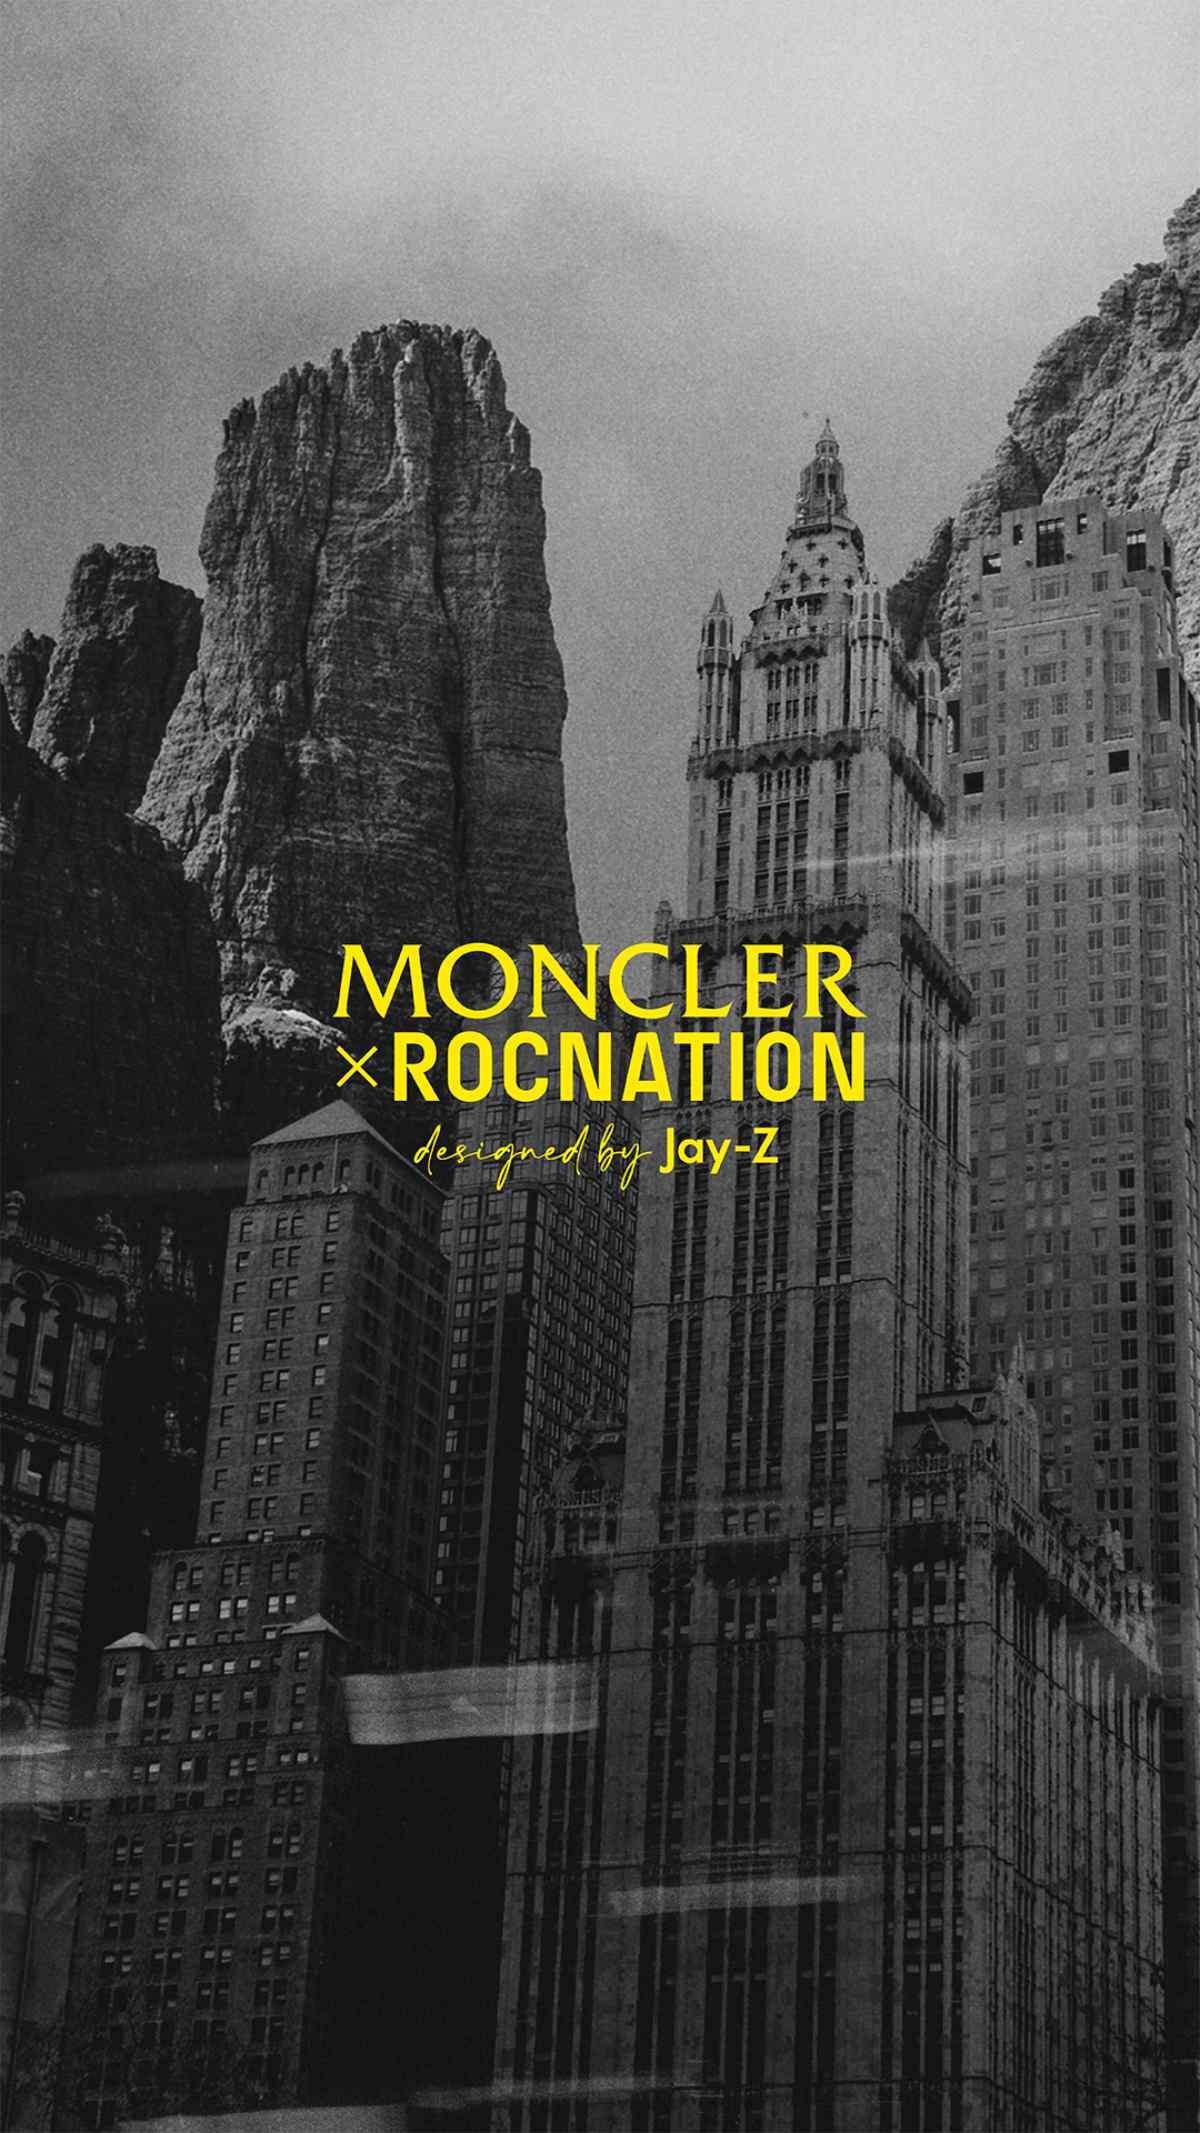 Moncler Genius Presents Its Latest Collection Designed By JAY-Z, In Partnership With Roc Nation